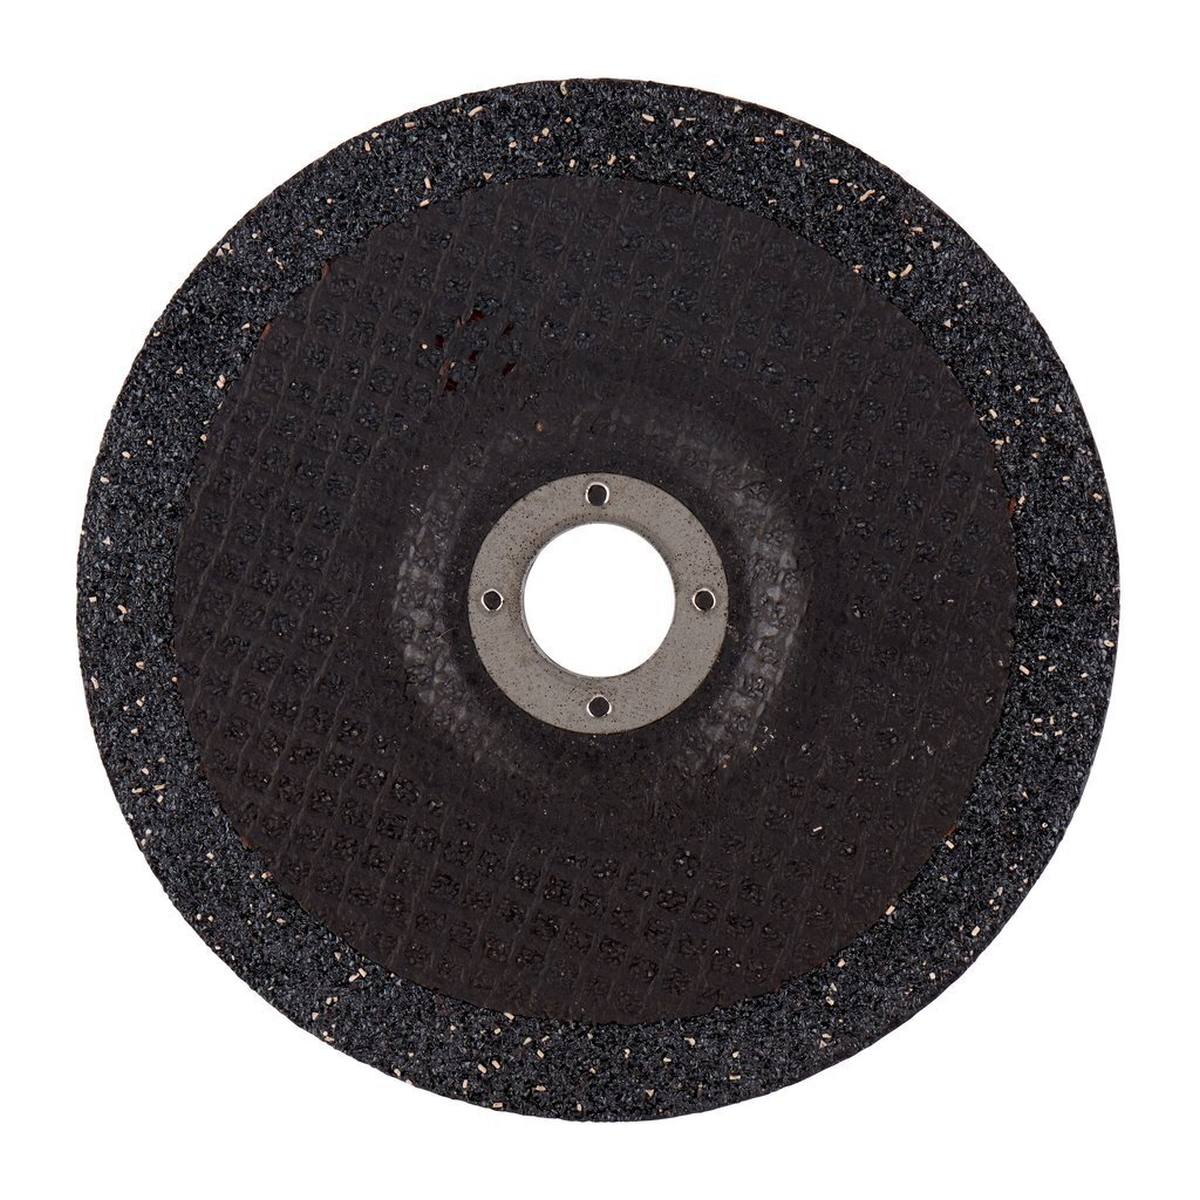 3M Silver grinding disc, 150 mm, 7.0 mm, 22.23 mm, type 27